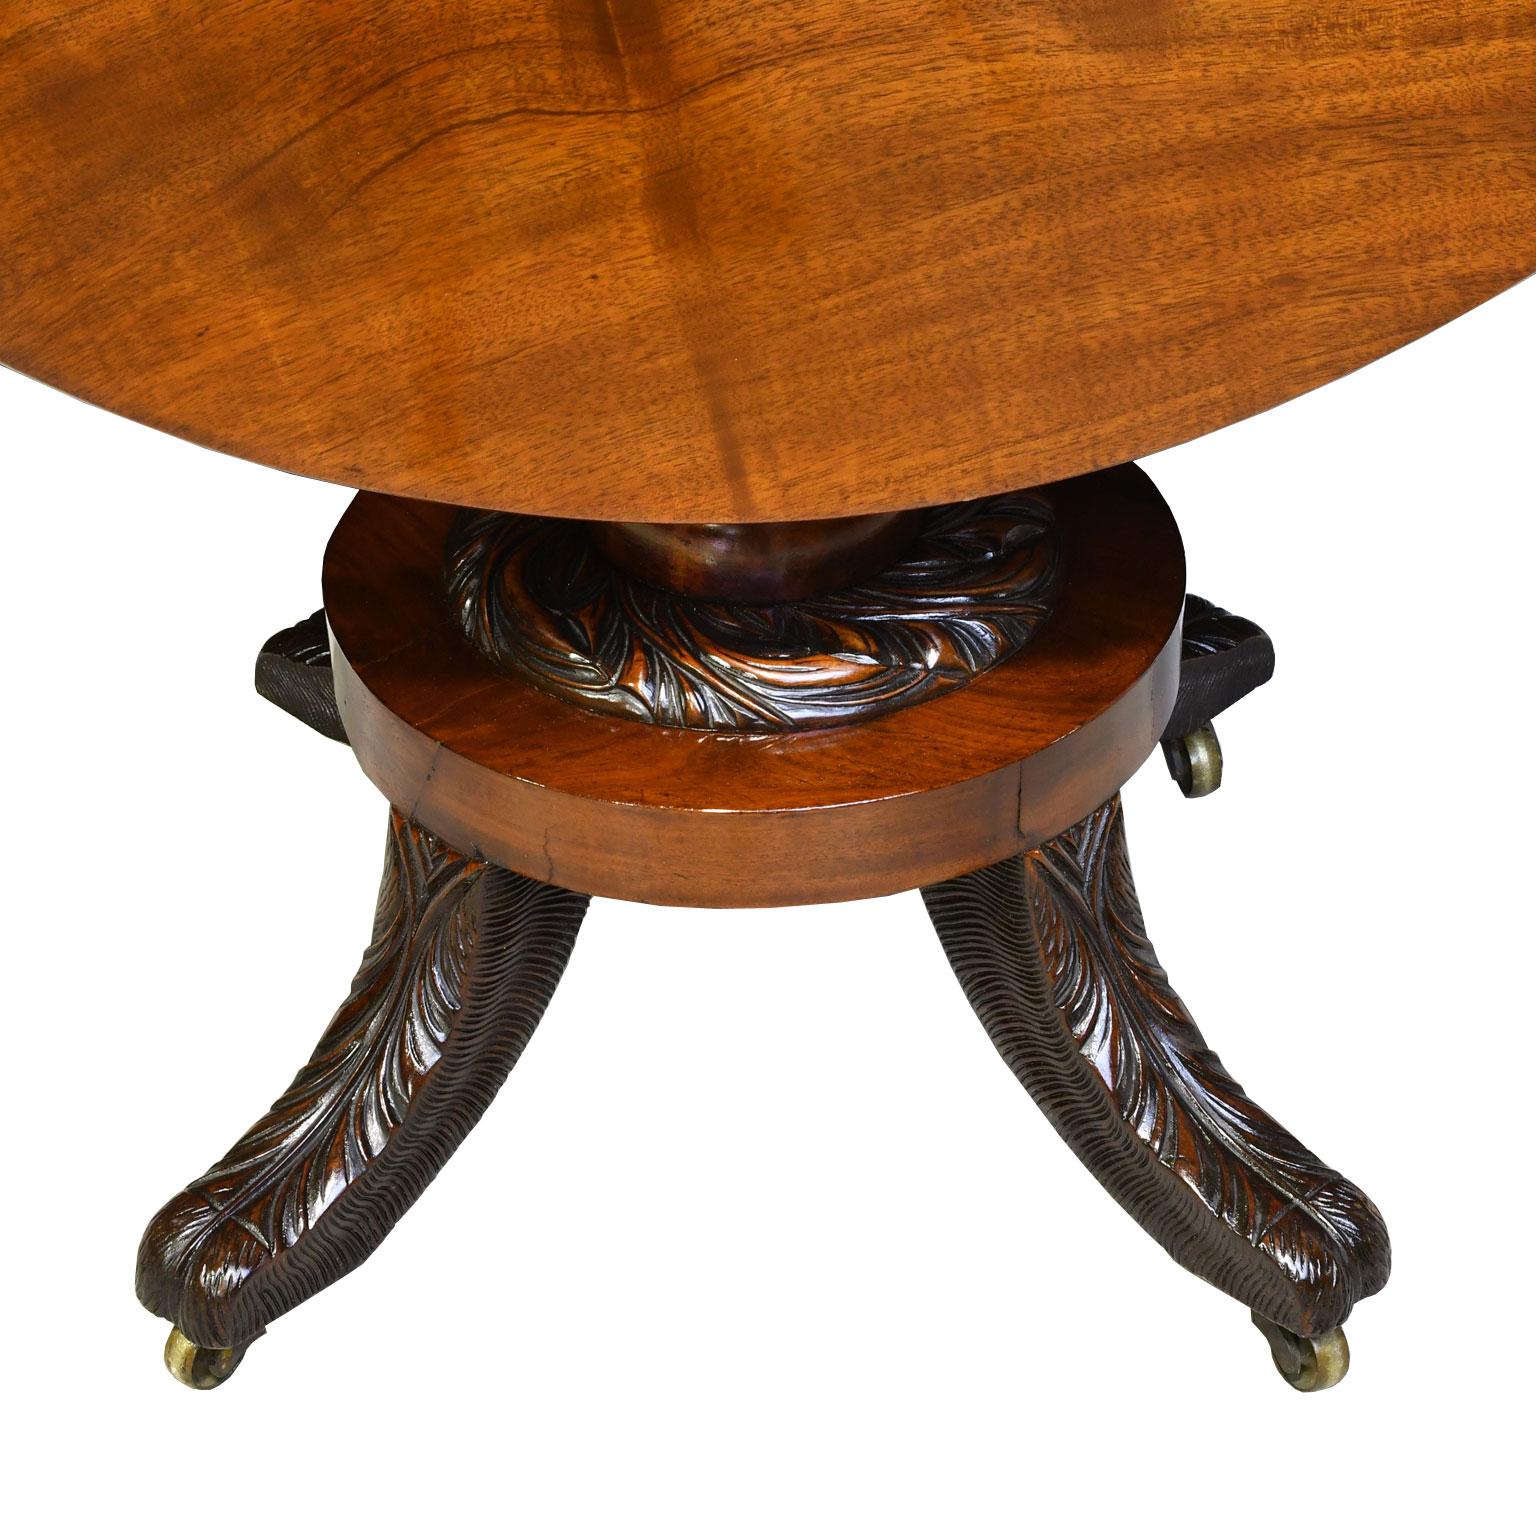 American Federal Round Pedestal Table in West Indies Mahogany, New York, circa 1820